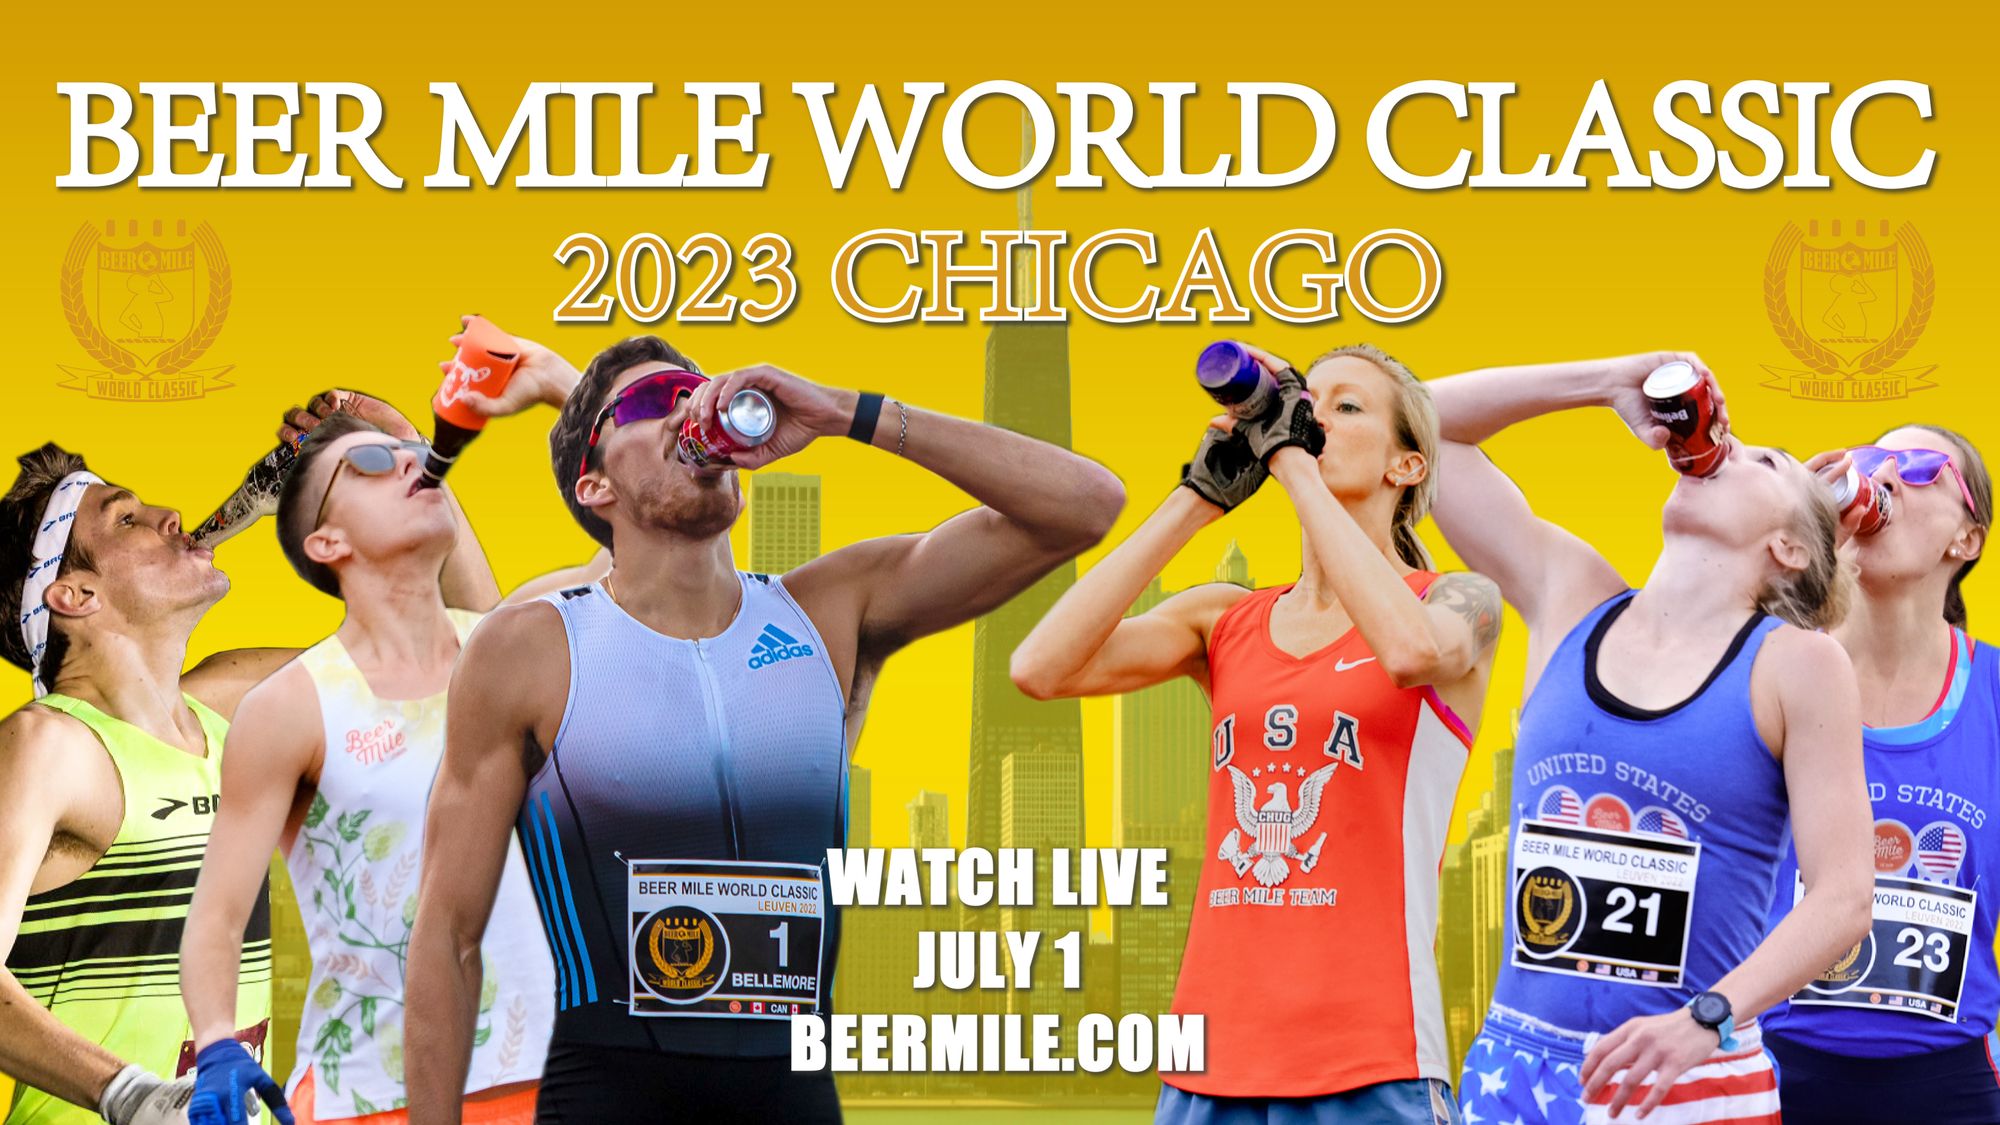 Watch the 2023 Beer Mile World Classic Live on July 1